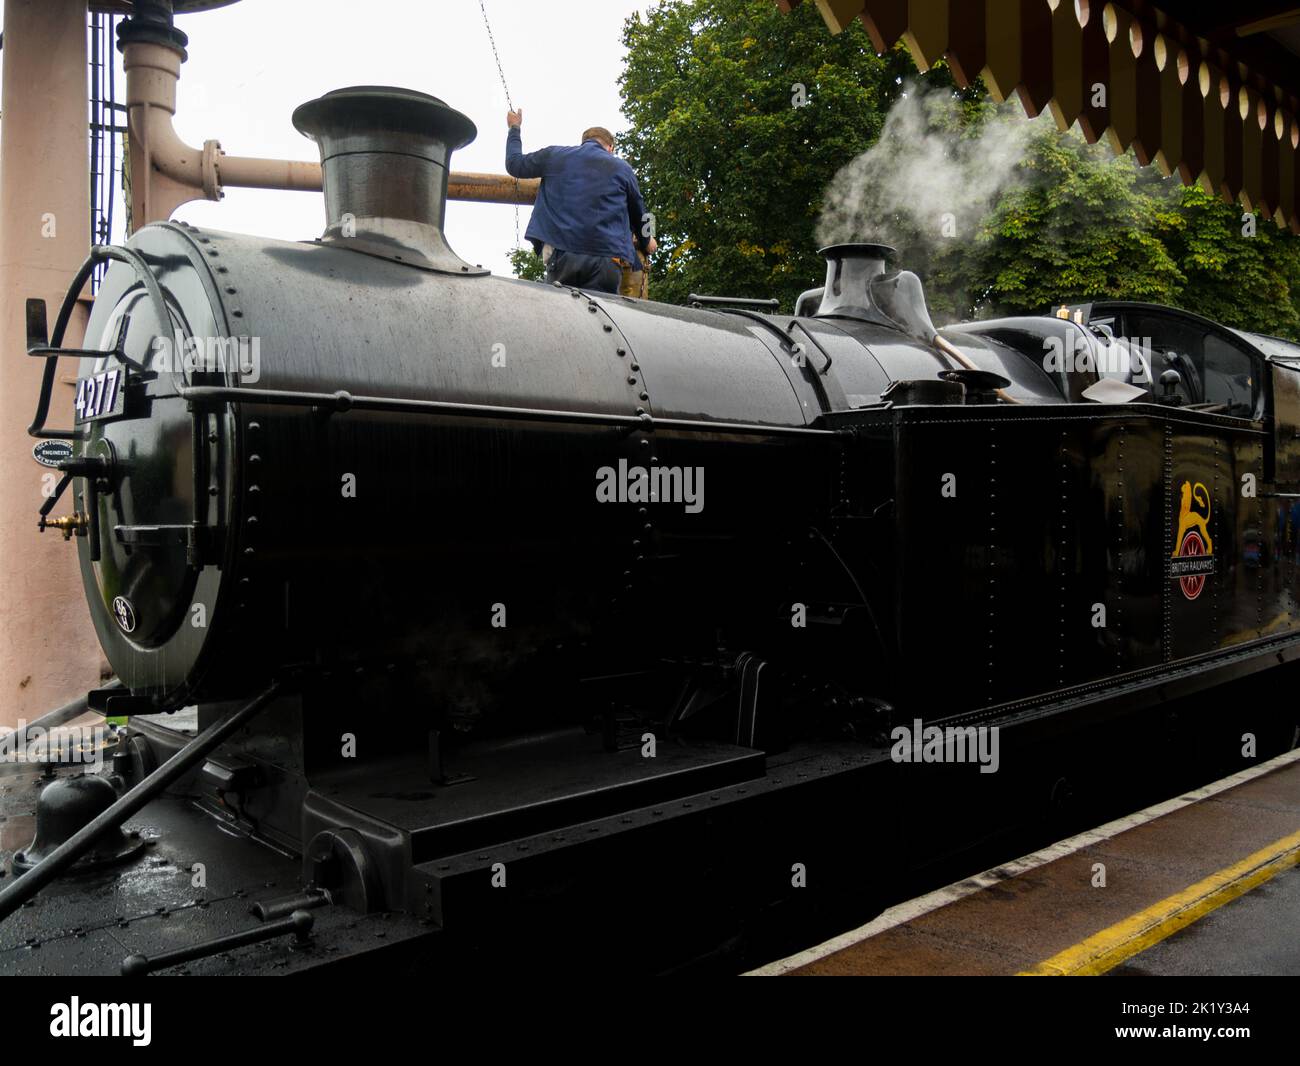 Driver filling steam engine No 4277 of Dartmouth Steam Railway with water in Paignton railway station Devon England UK before journey to Dartmouth Stock Photo